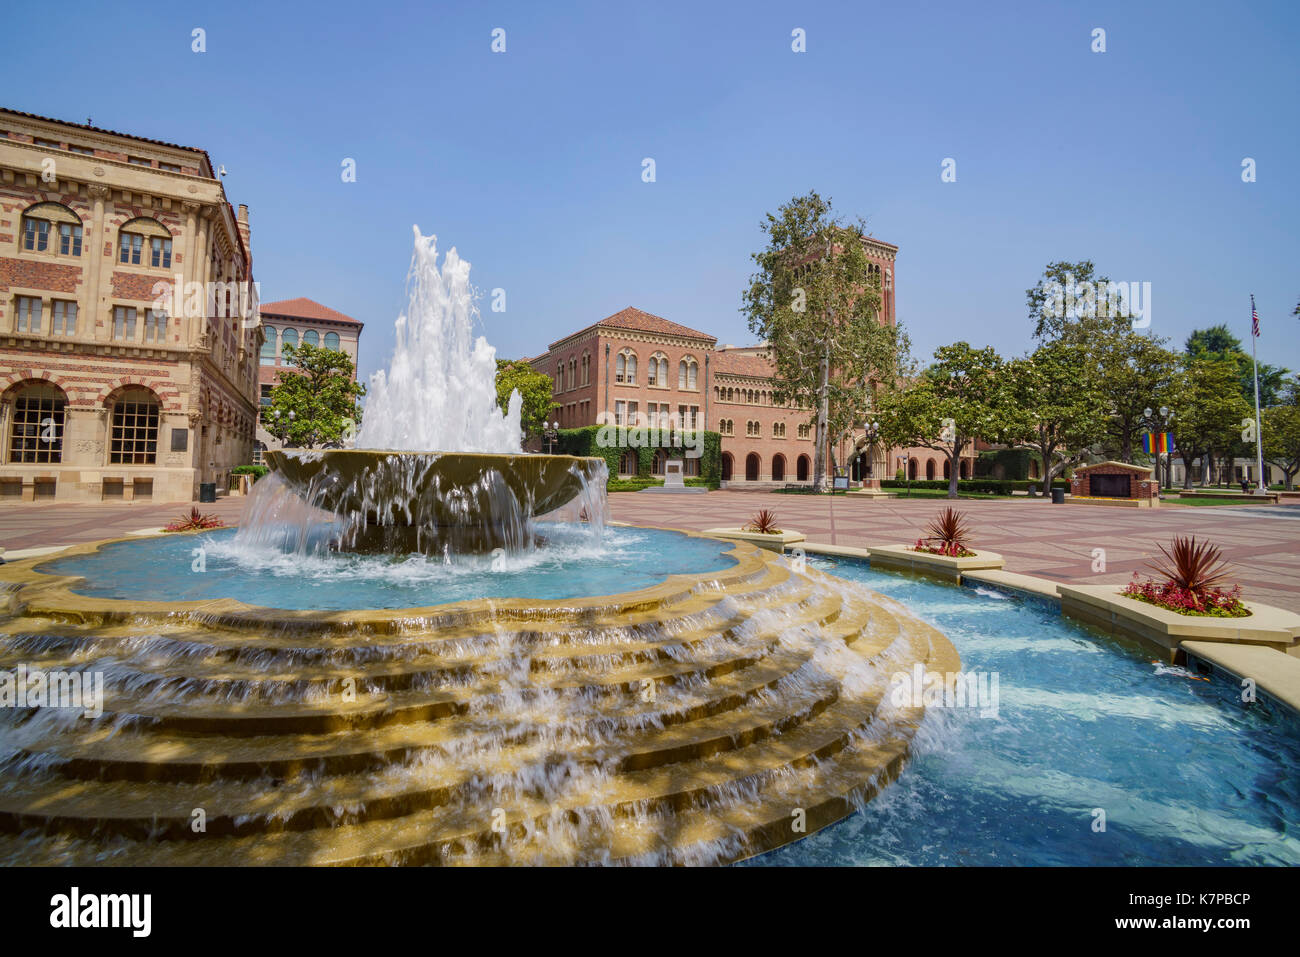 Los Angeles, JUN 4: Fountain and Bovard Aministration, Auditorium of the University of Southern California on JUN 4, 2017 at Los Angeles Stock Photo